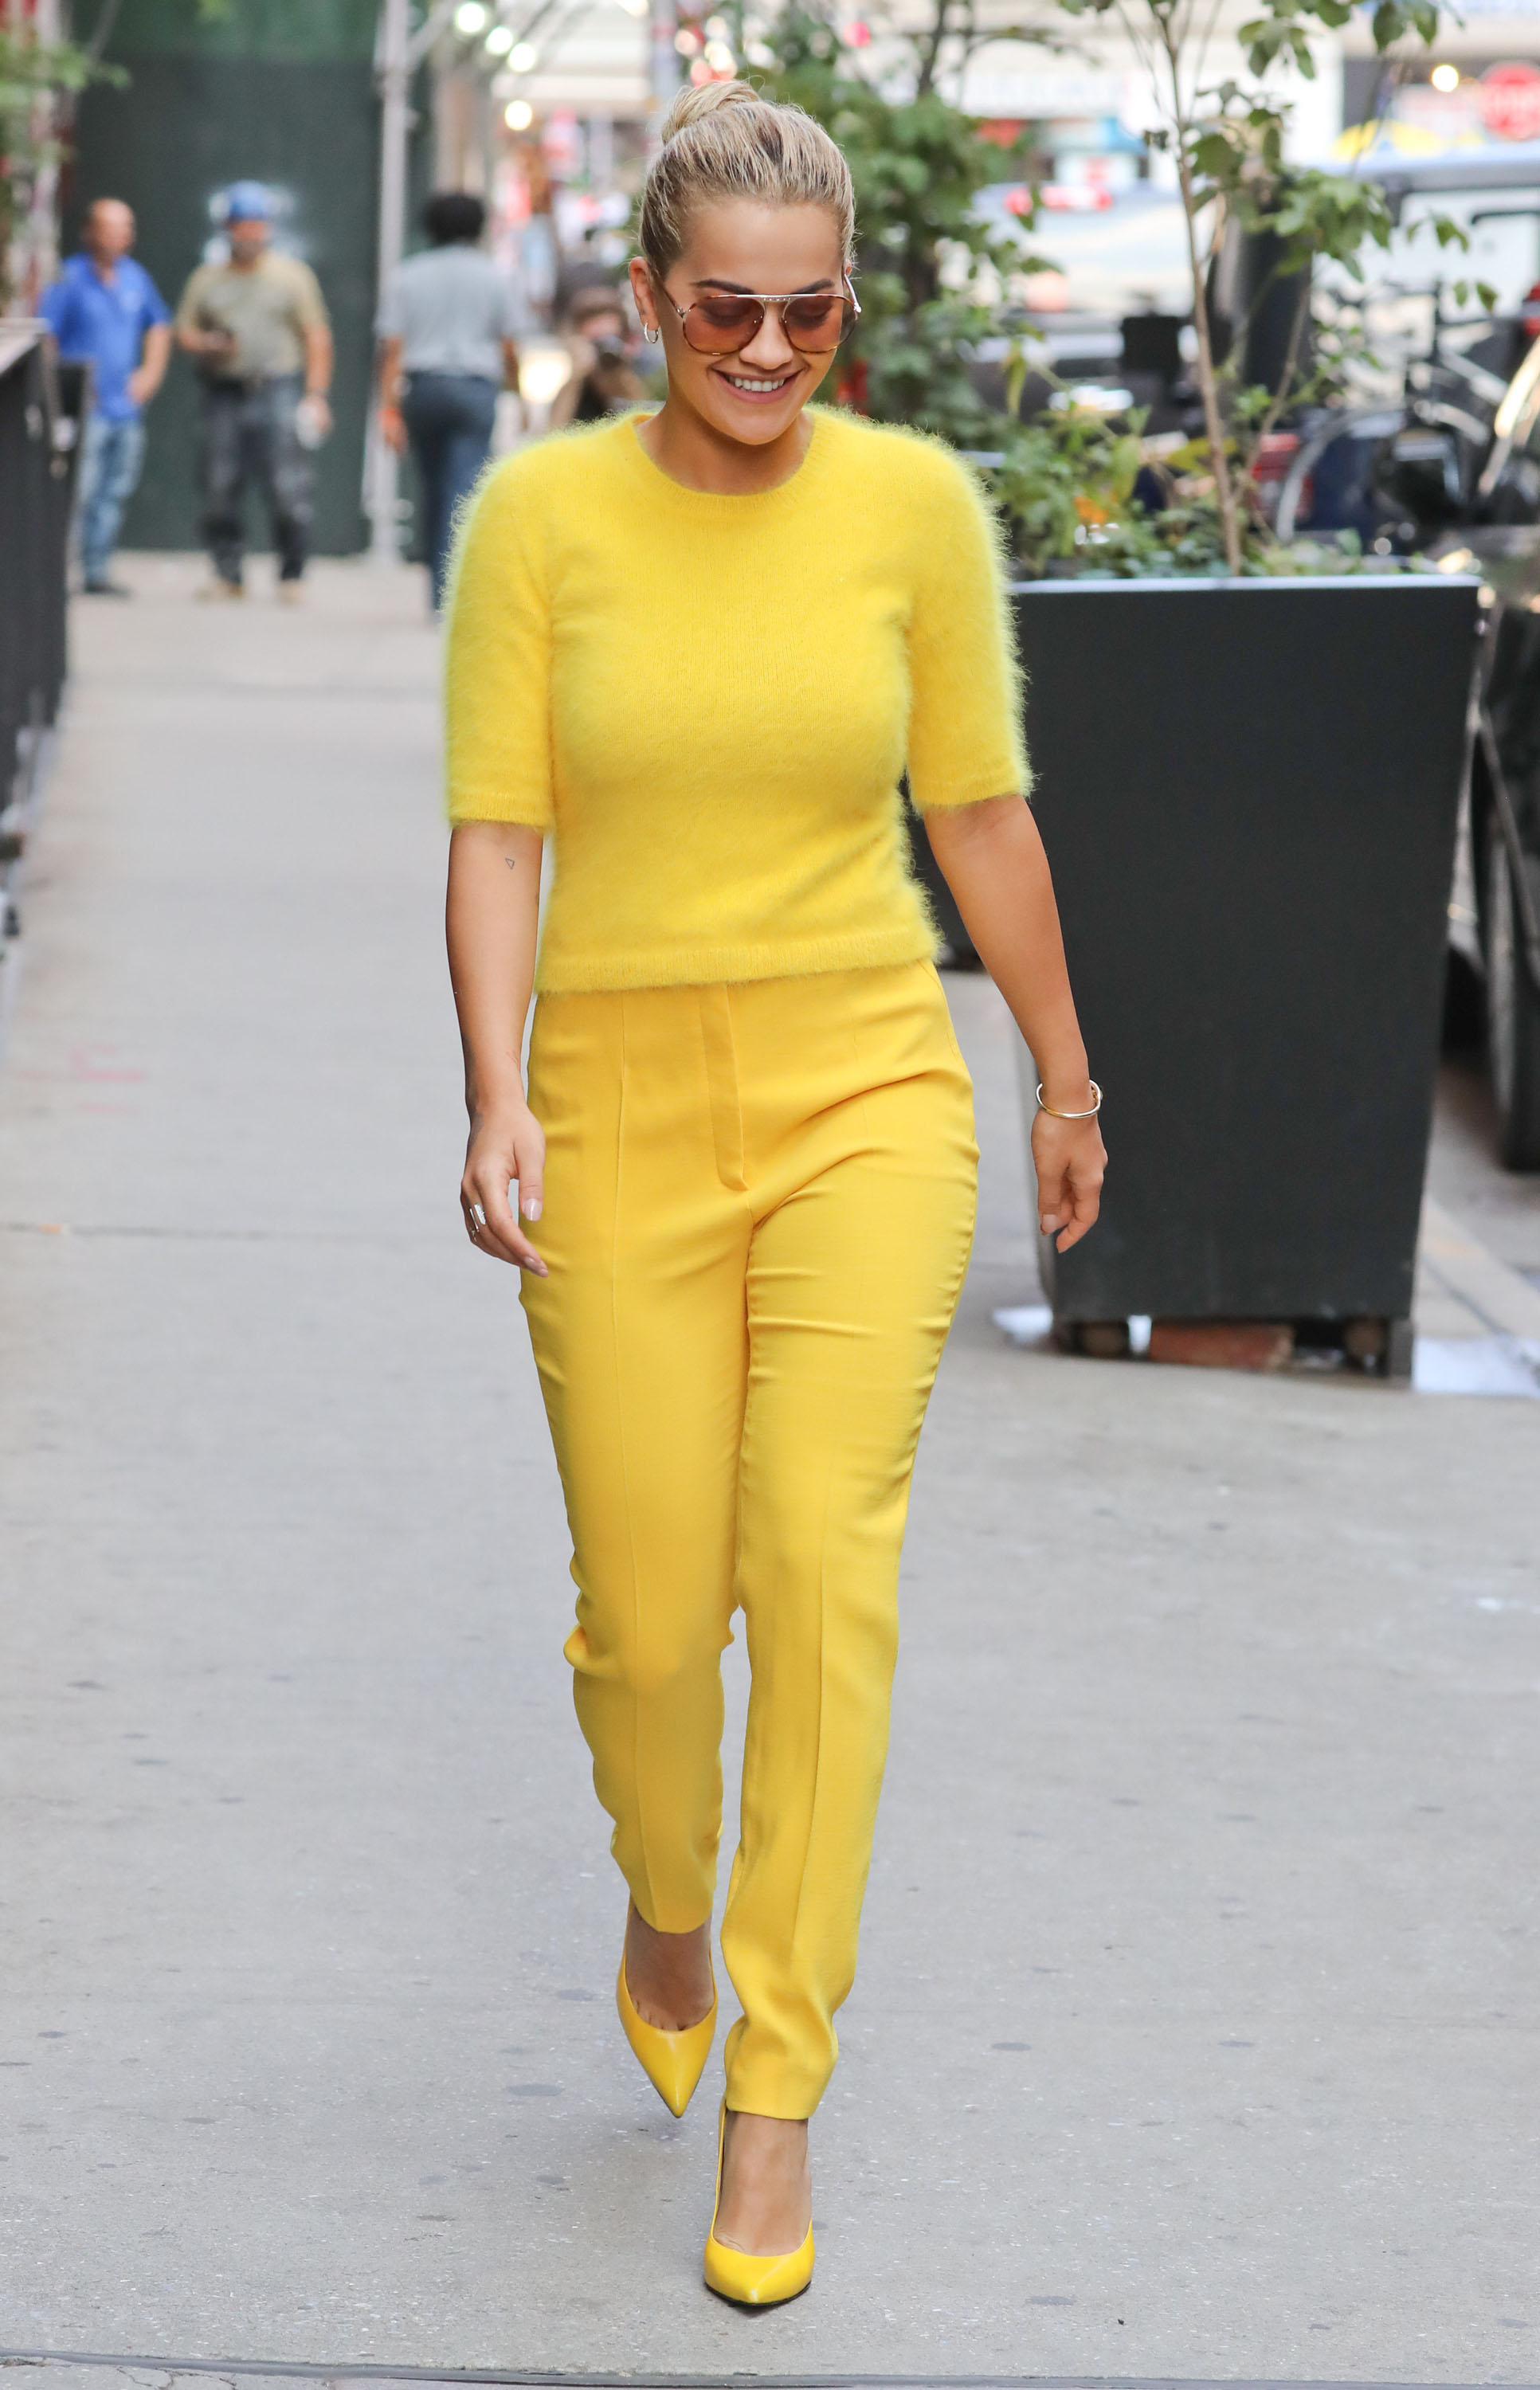 Rita Ora steps out dressed head to toe in yellow in New York City_04.jpg